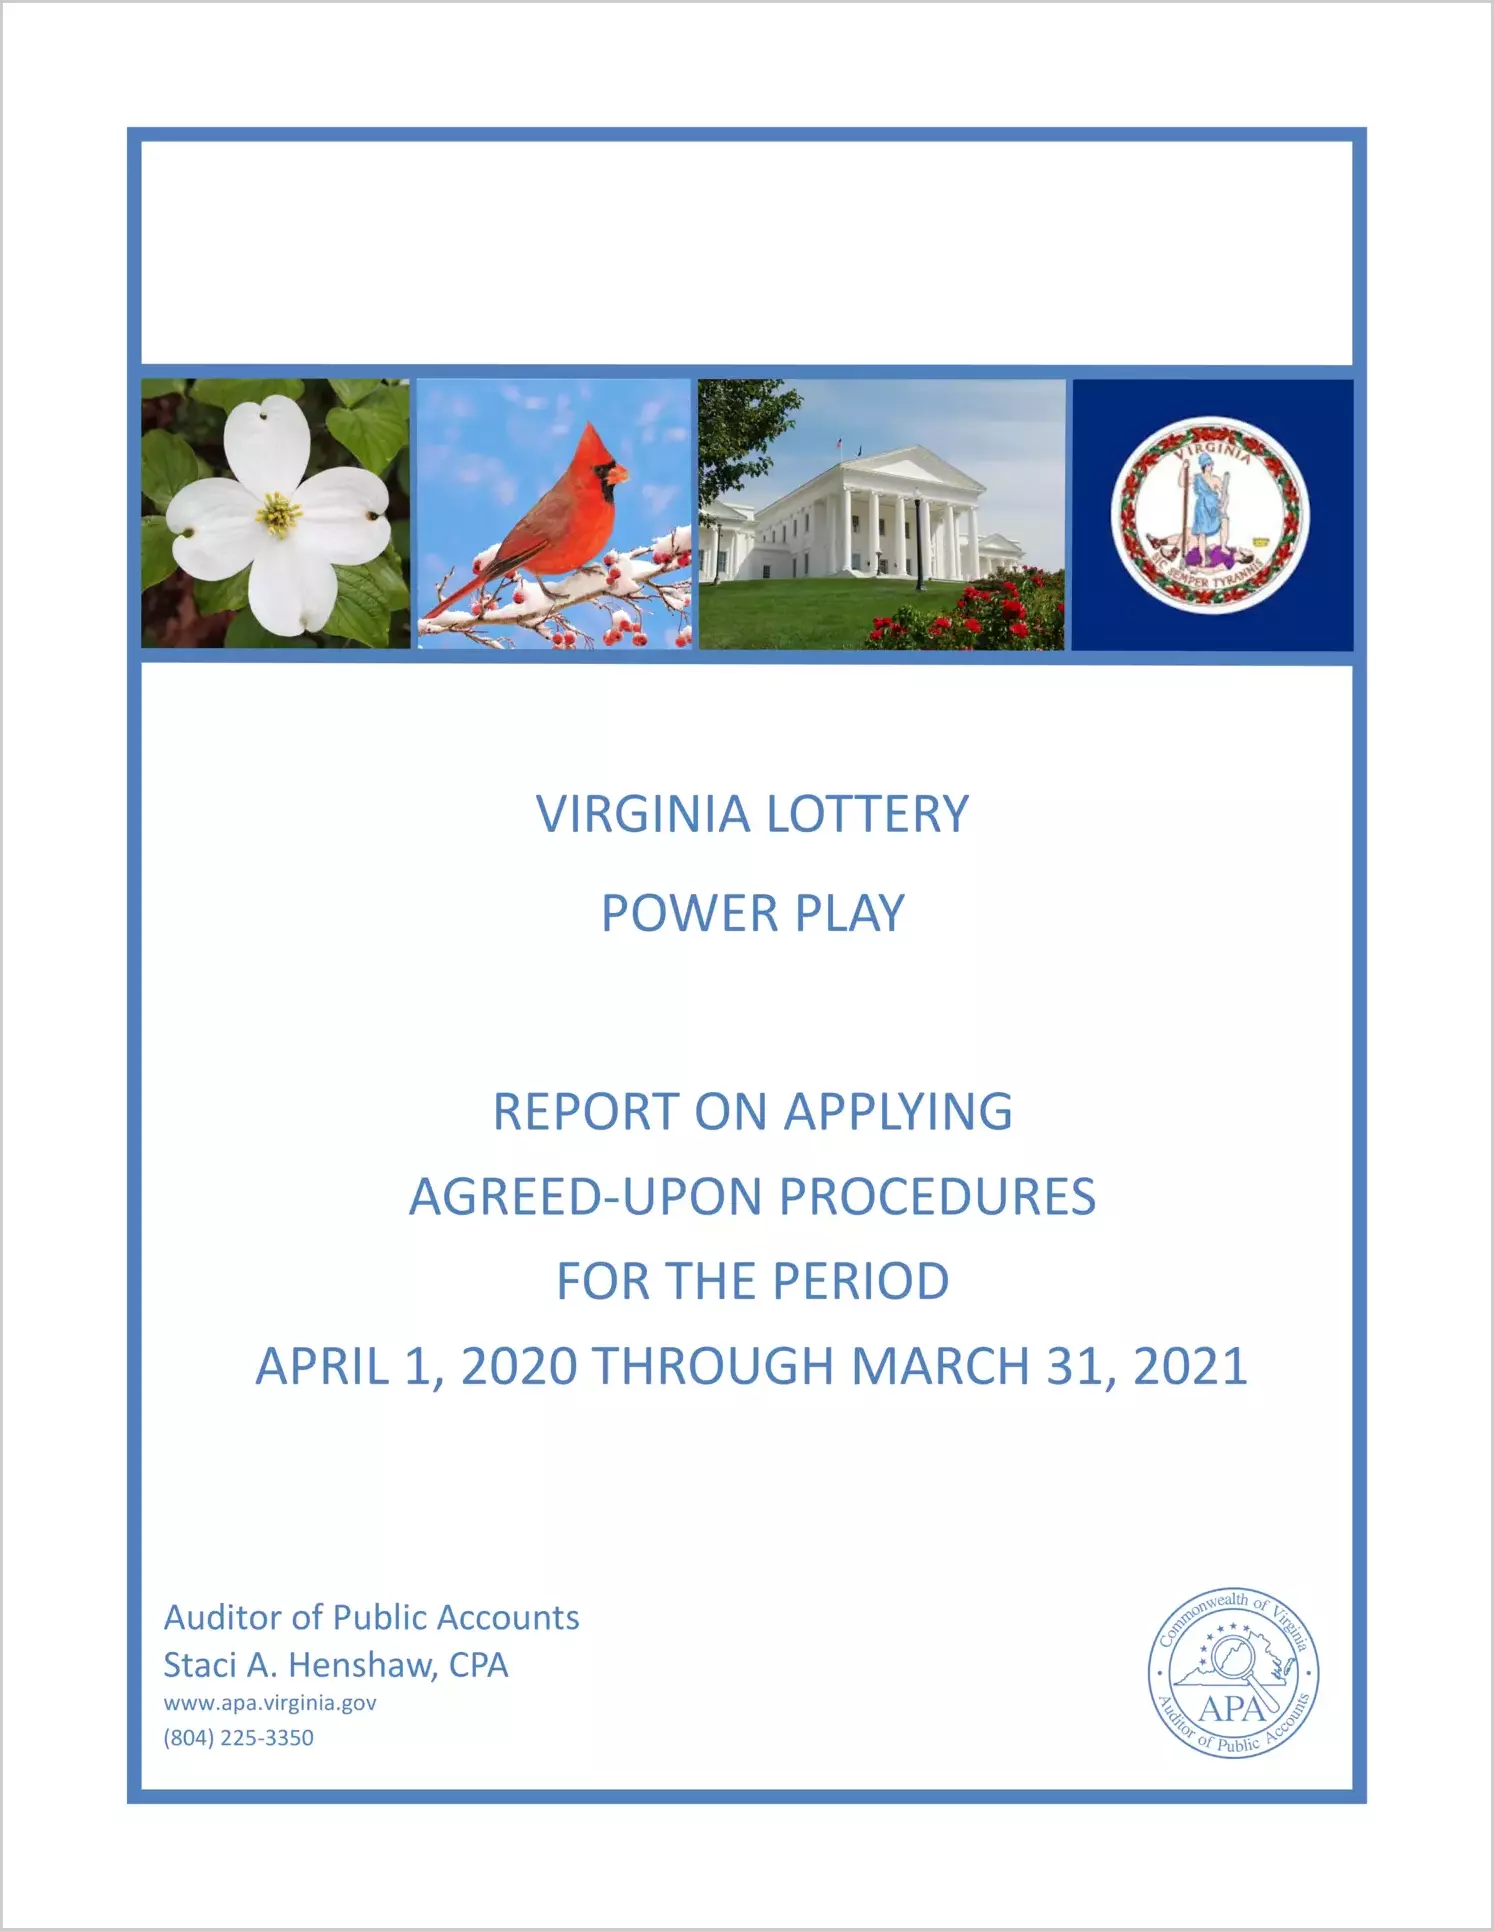 Virginia Lottery Power Play Report on Applying Agreed-Upon Procedures for the period April 1, 2020 through March 31, 2021